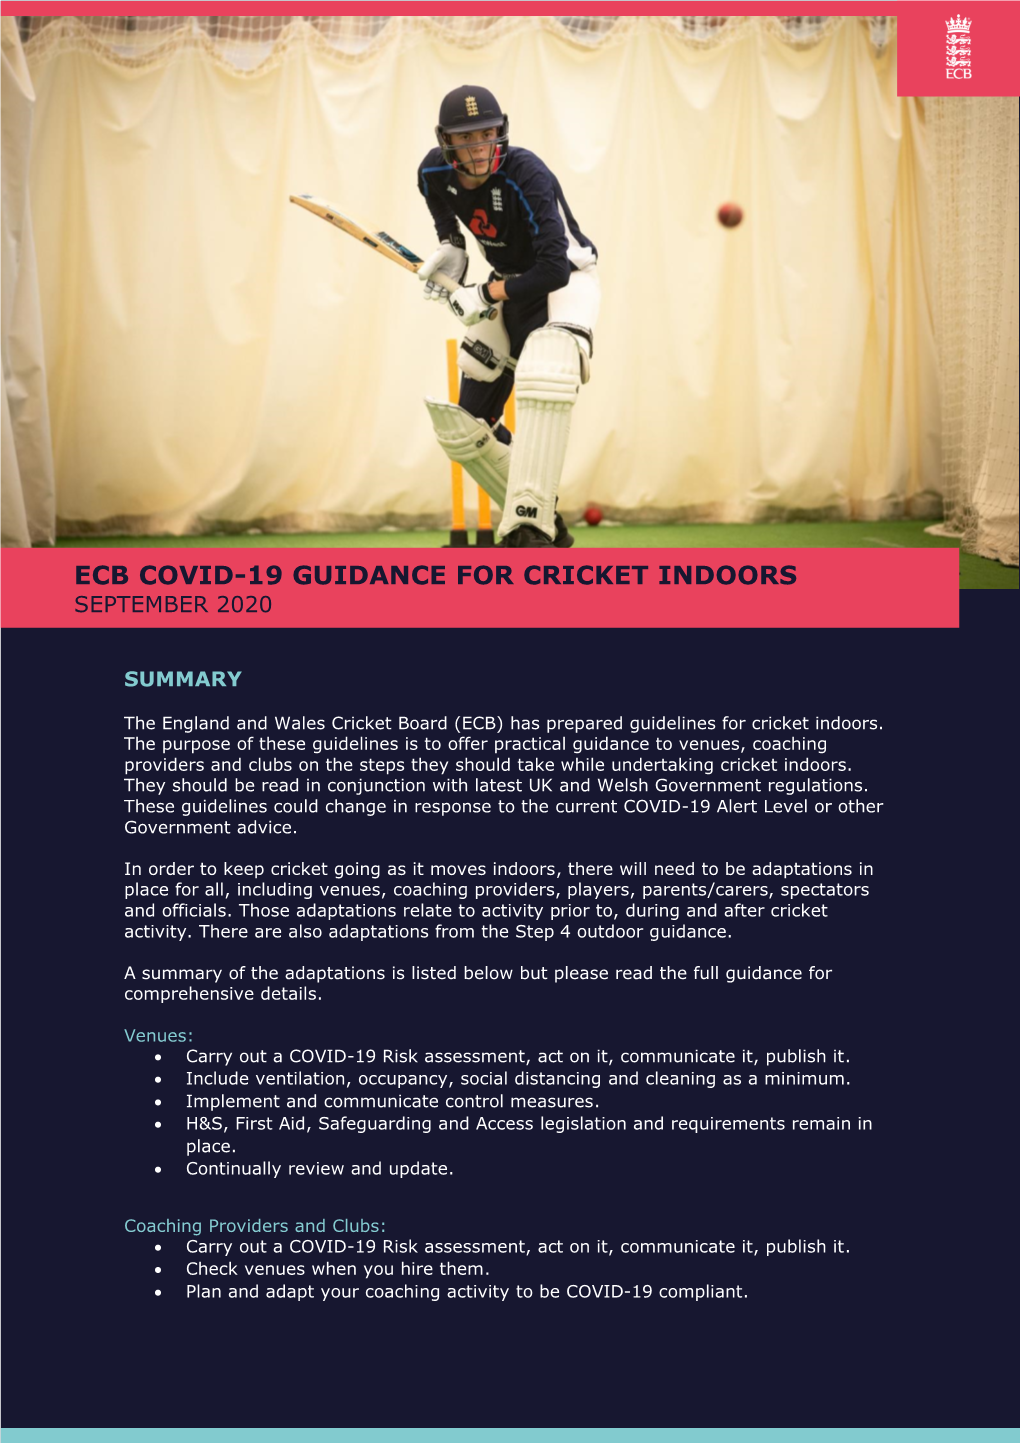 ECB Guidance for Cricket Indoors Is to Make the ‘Indoors As Outdoors As Possible’